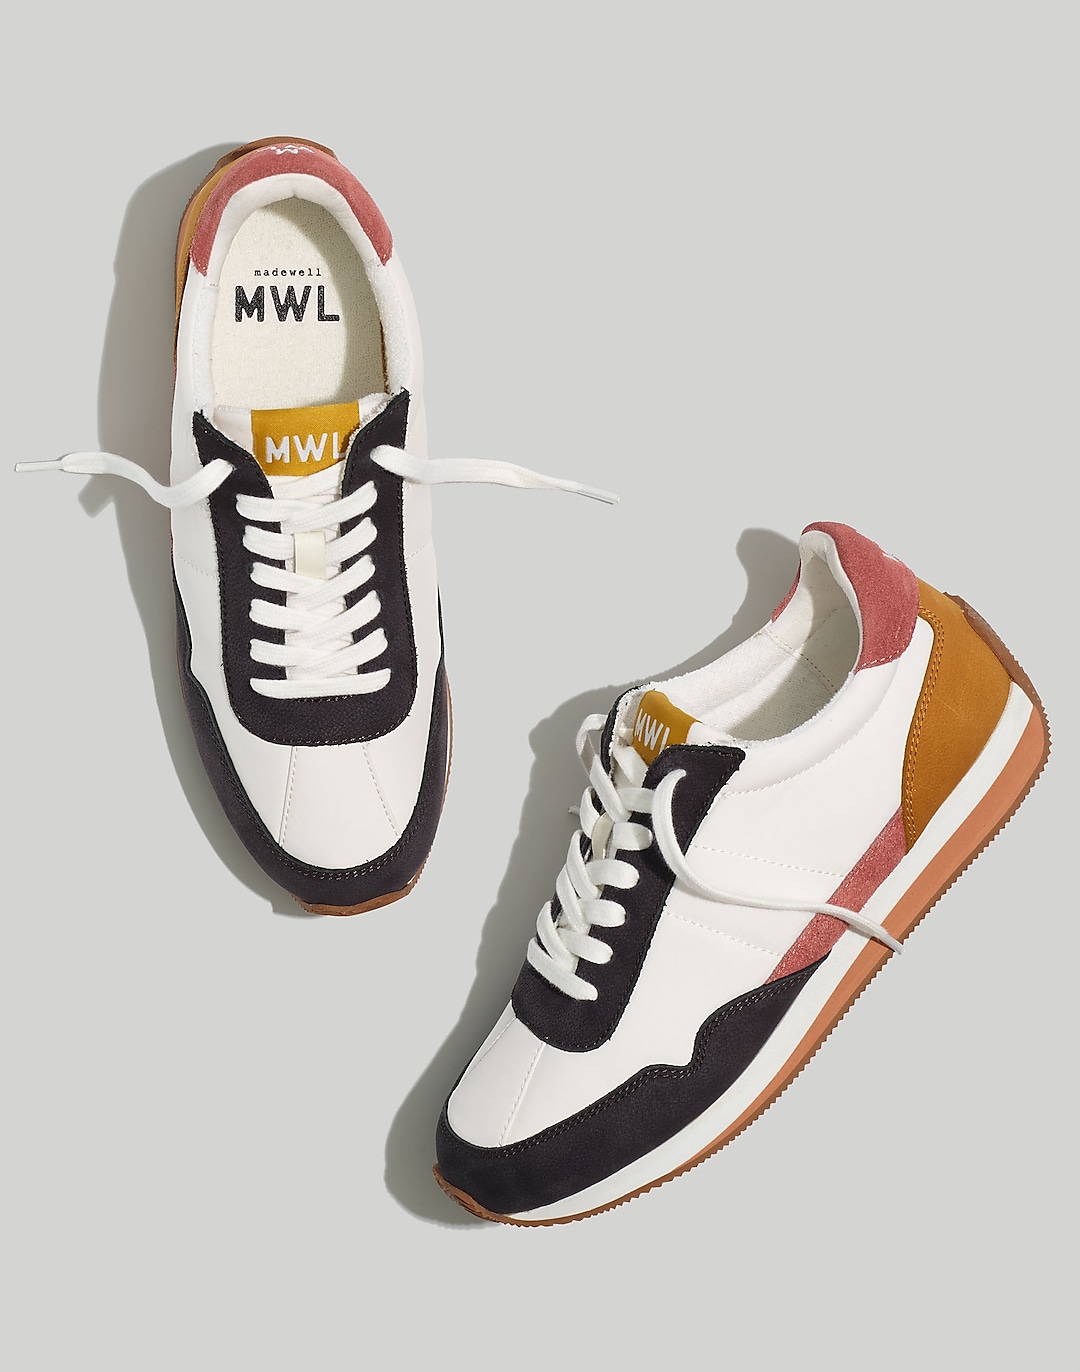 League Sneakers in Washed Nubuck and Suede | Madewell